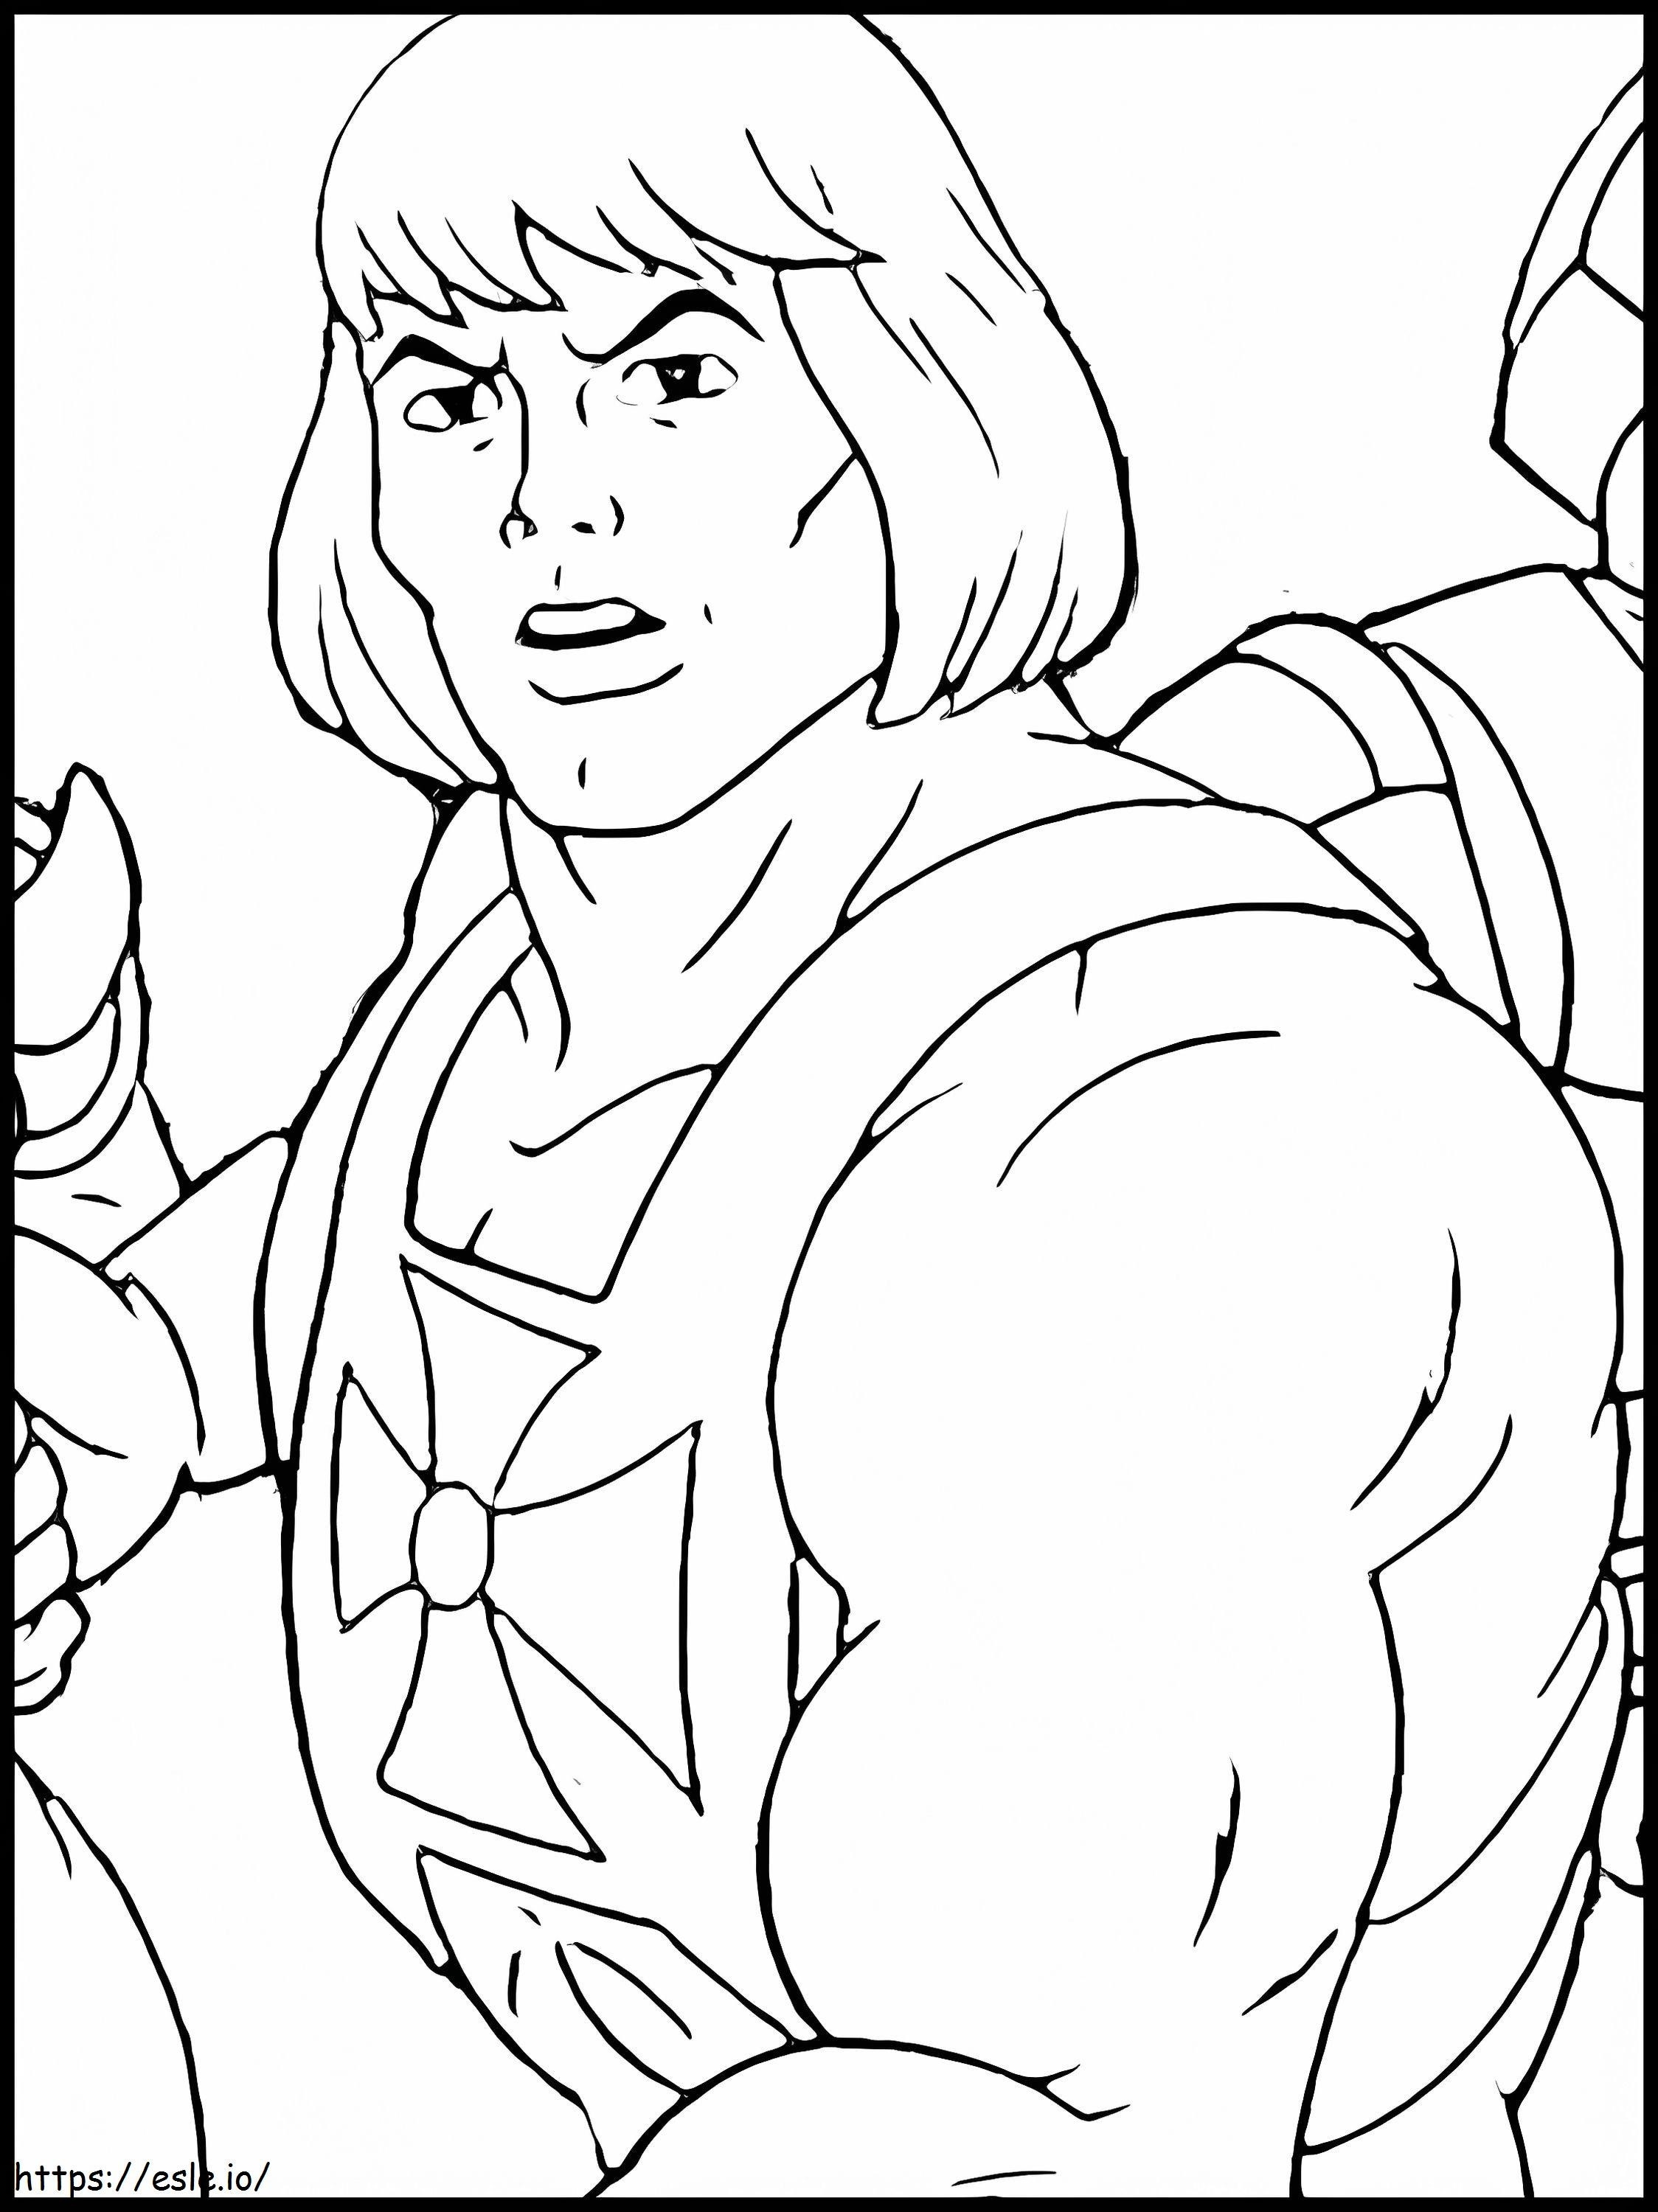 He Man 1 coloring page